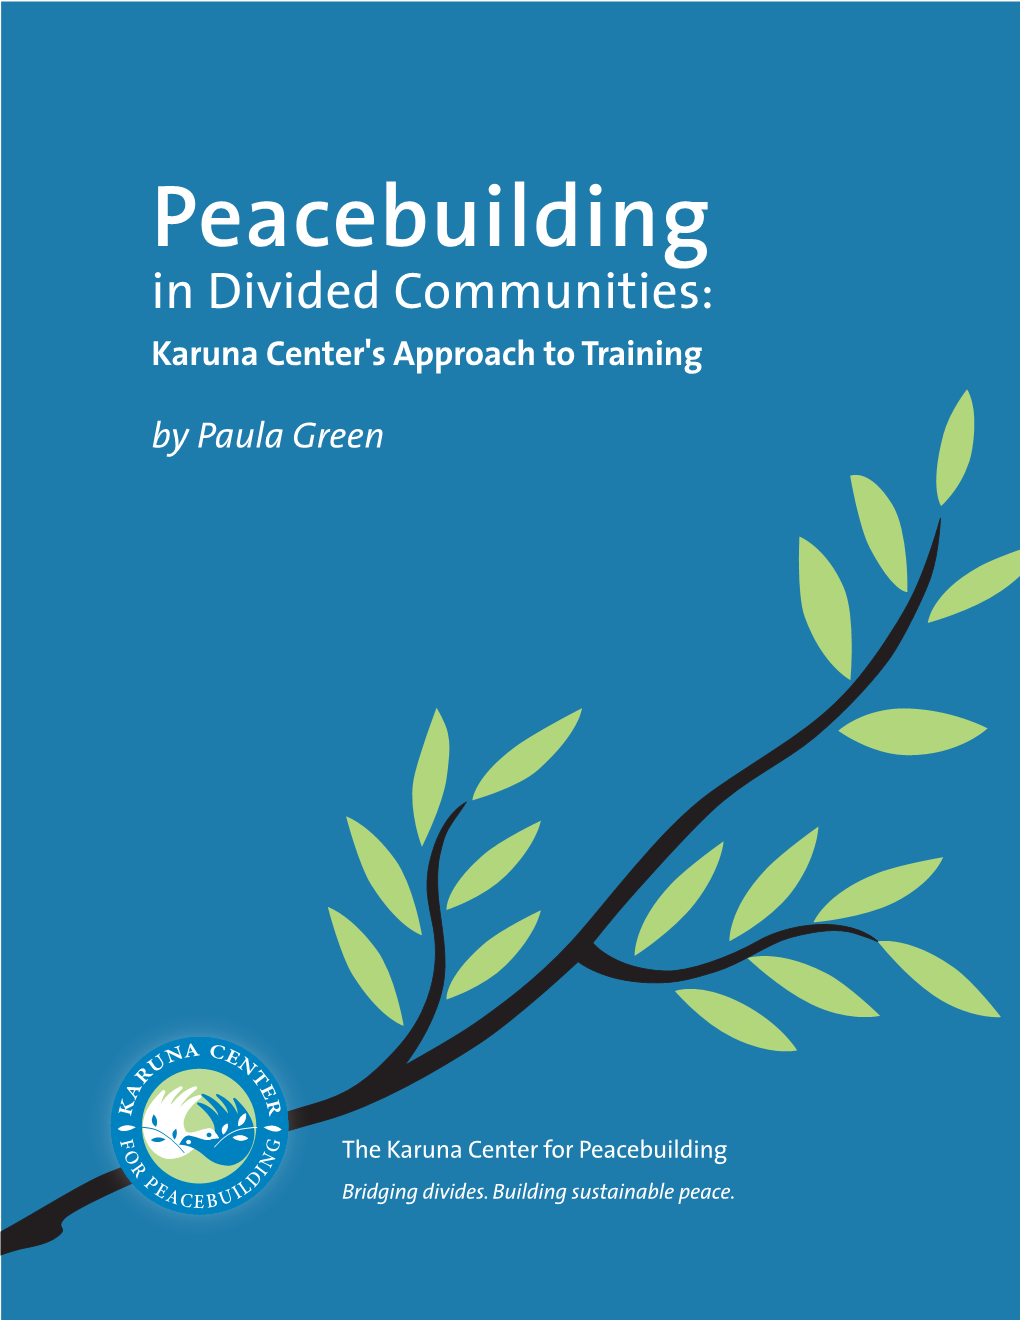 Peacebuilding in Divided Communities: Karuna Center's Approach to Training by Paula Green